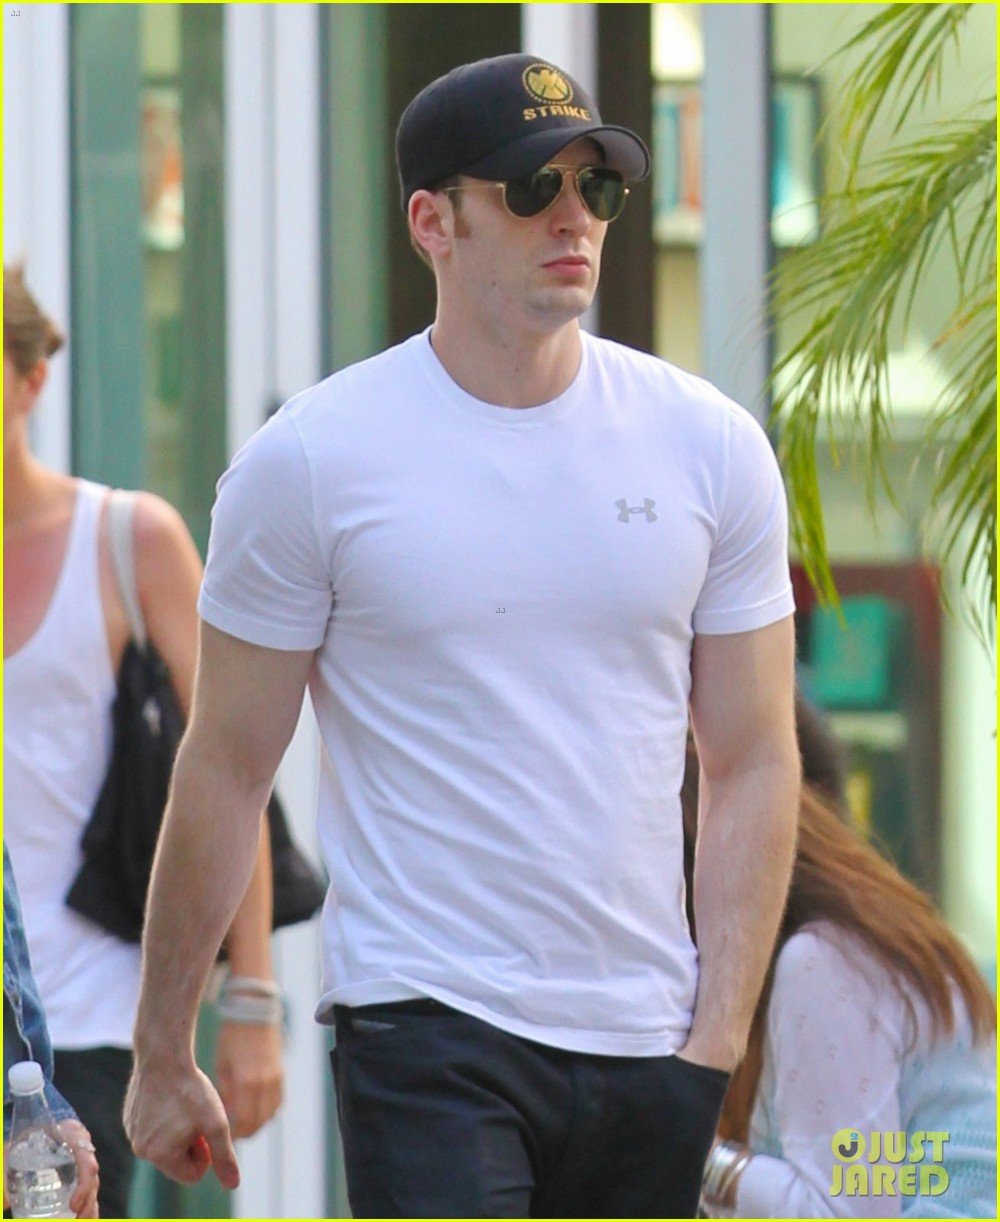 minka kelly grabs chris evans chest at the movies 052904765